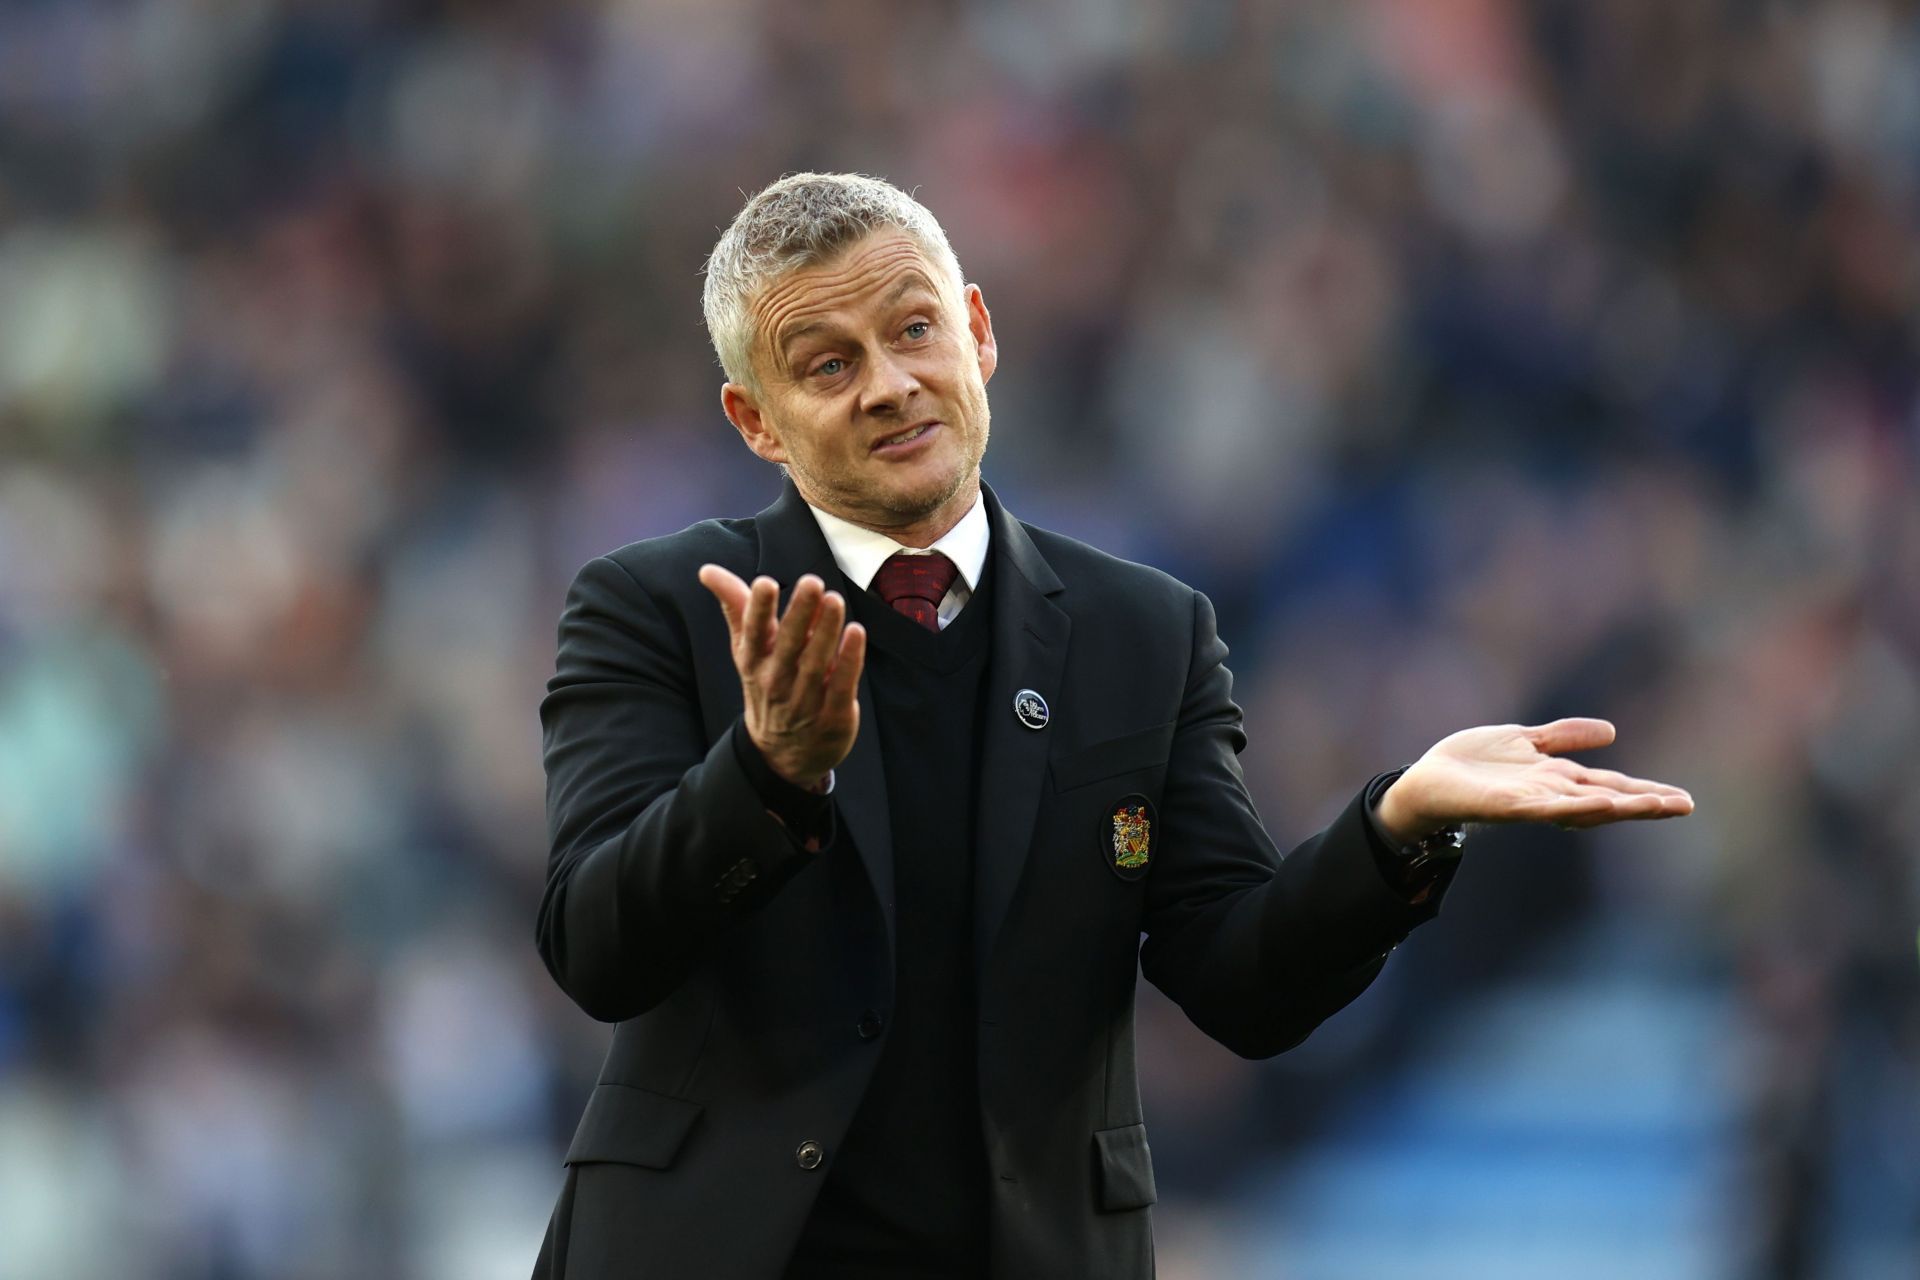 Ole Gunnar Solskjaer has failed to get Manchester United going in the right direction in recent weeks.